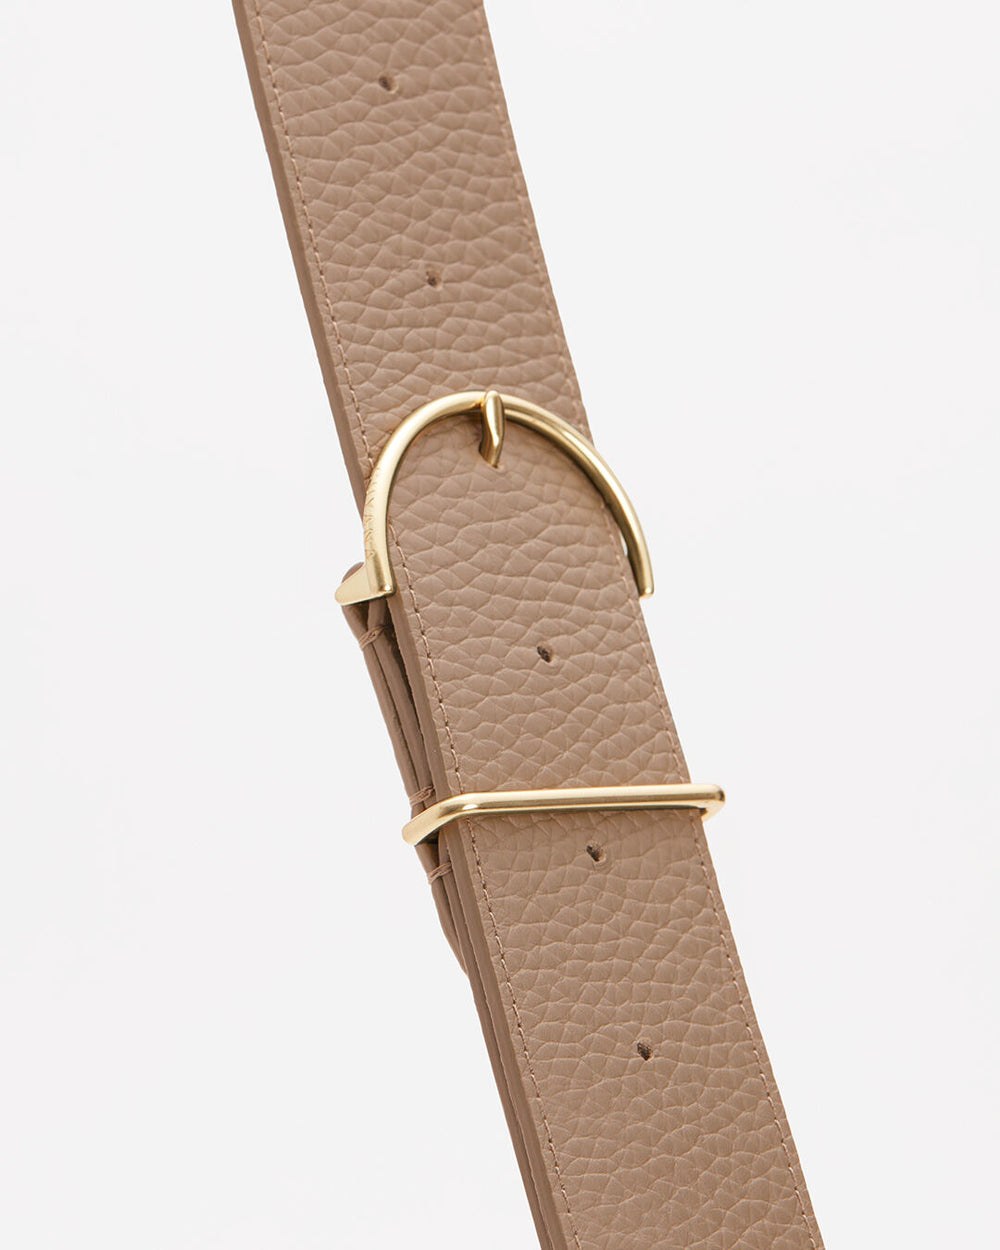 Leather strap with metal buckle against a plain background.